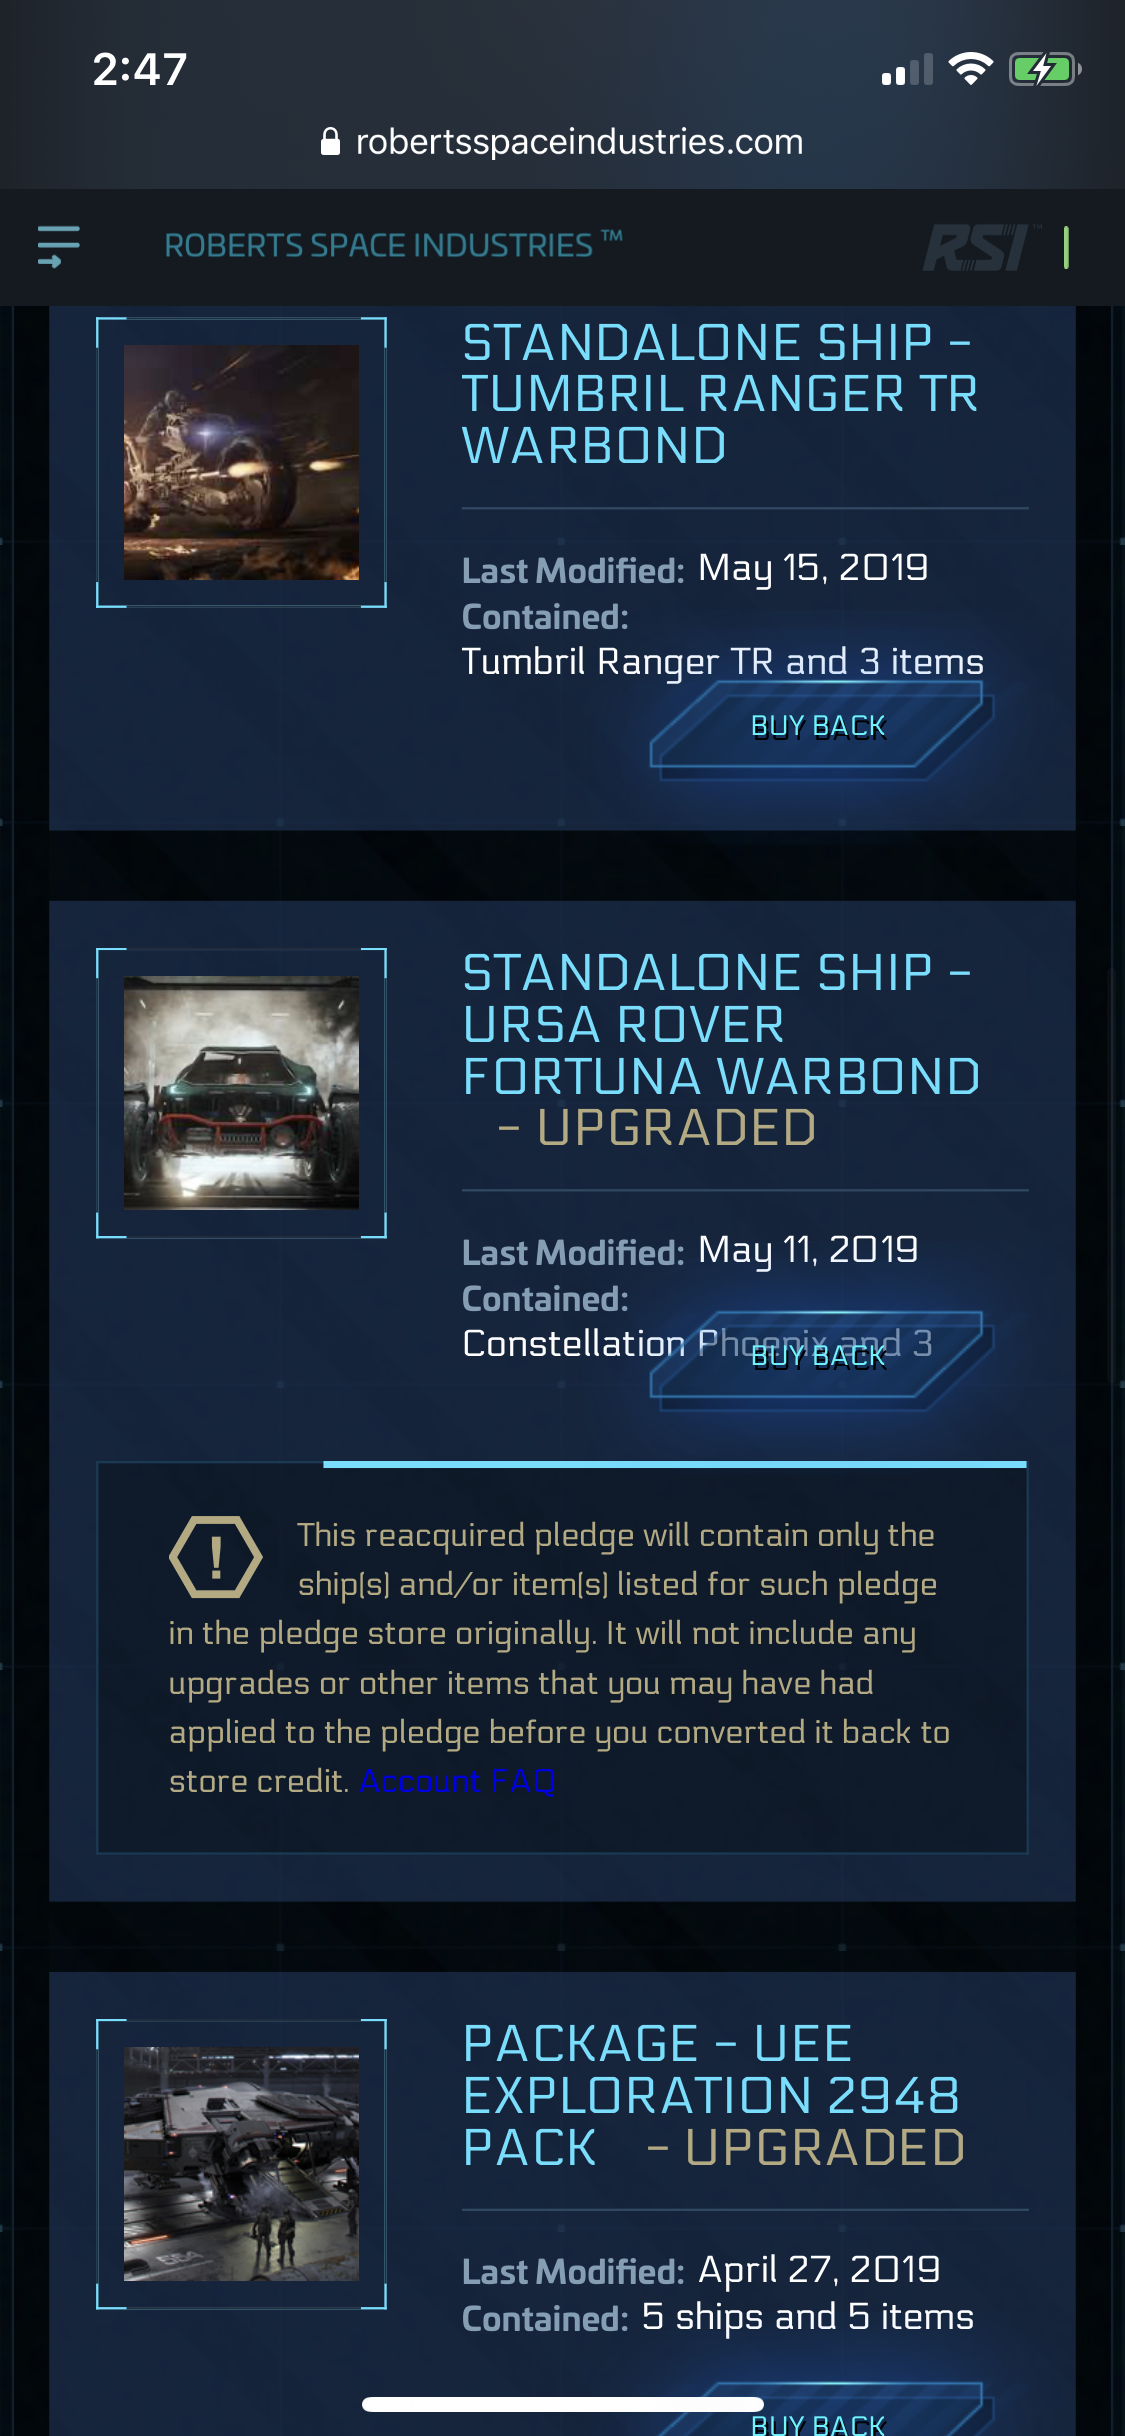 SOLD - Selling Star Citizen account for 25$ (worth 65$) - EpicNPC